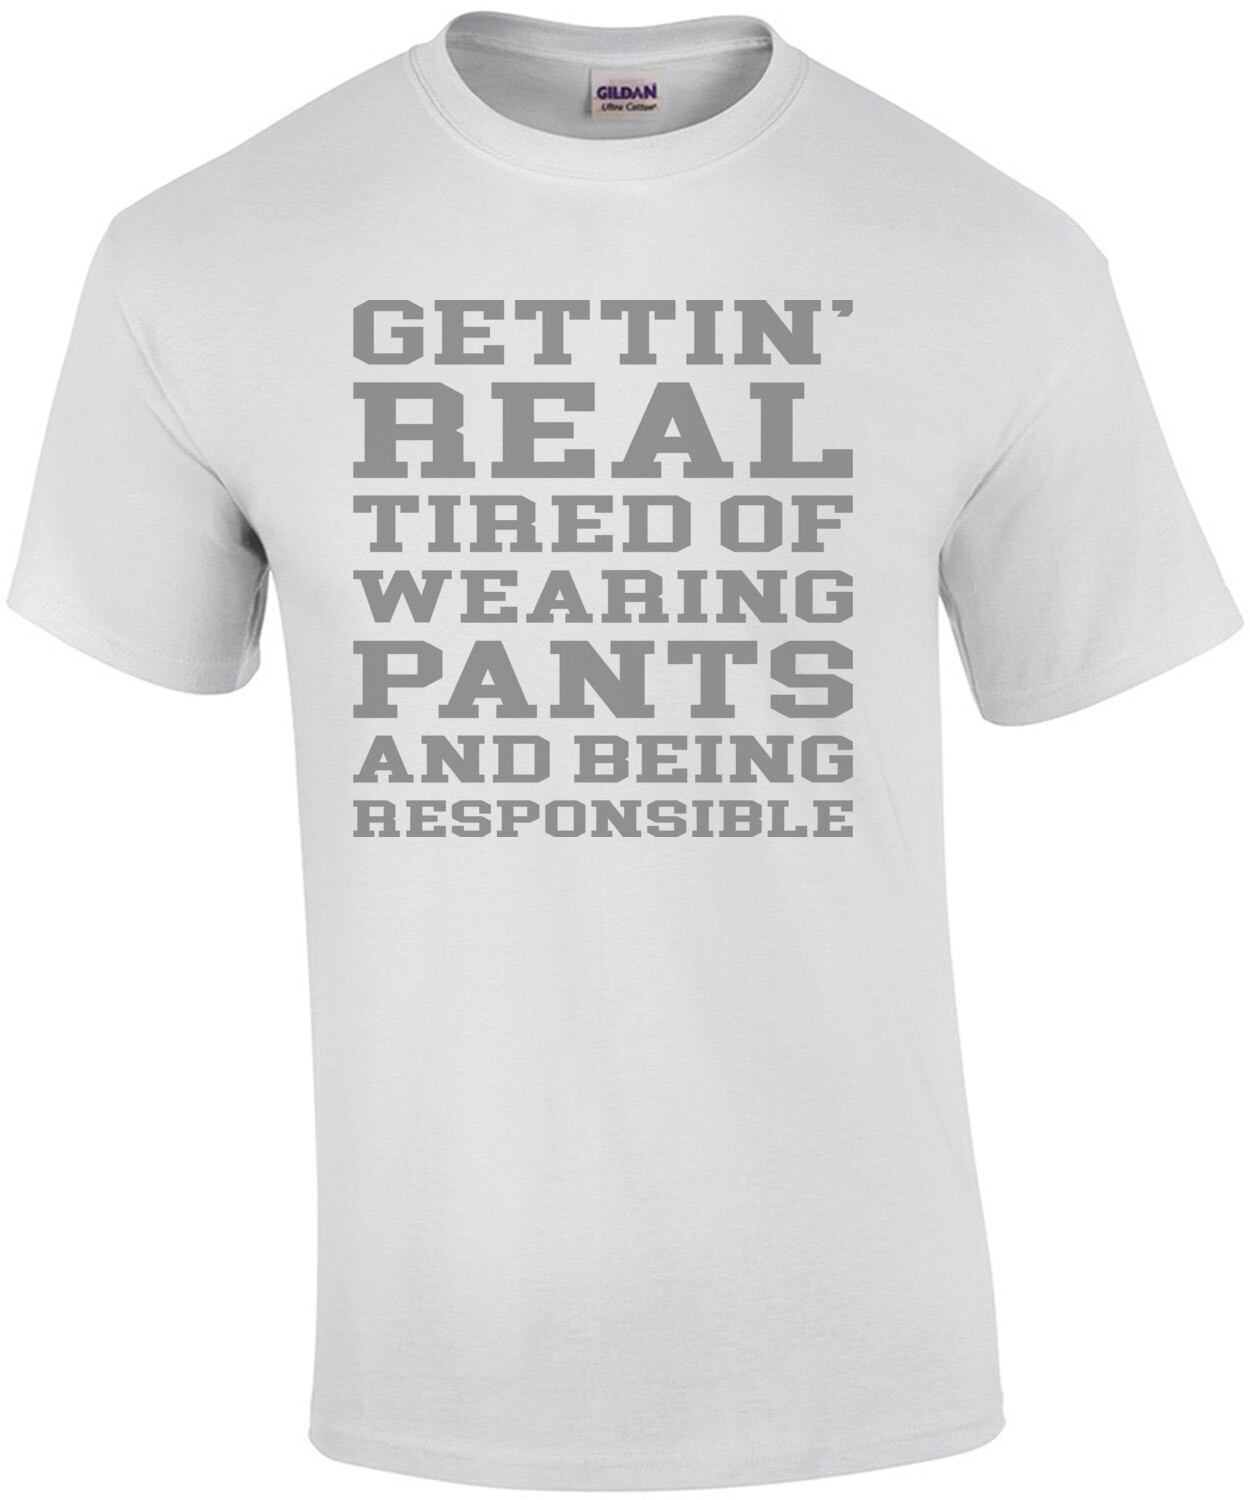 Gettin' real tired of wearing pants and being responsible - funny sarcastic t-shirt